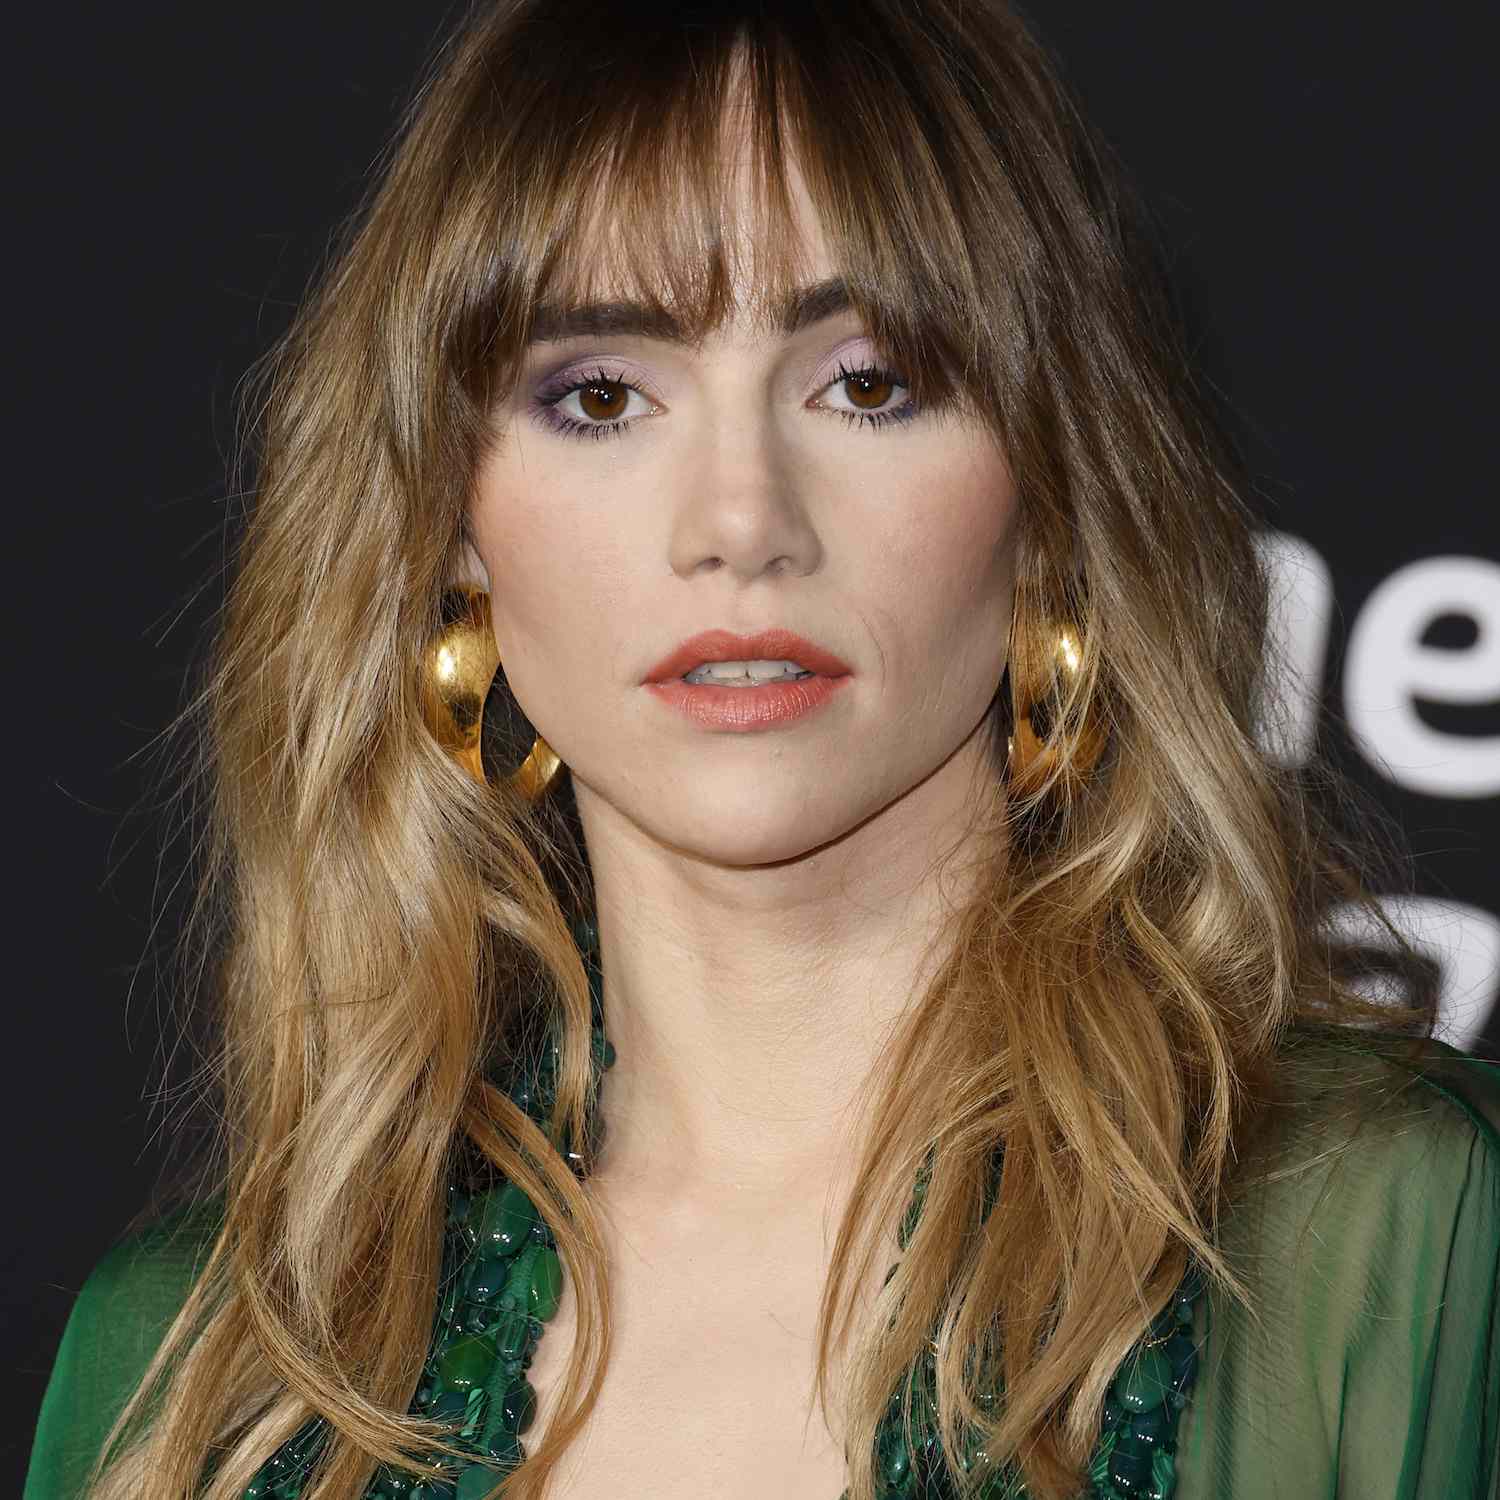 Suki Waterhouse wears a tousled ombre hairstyle with bangs